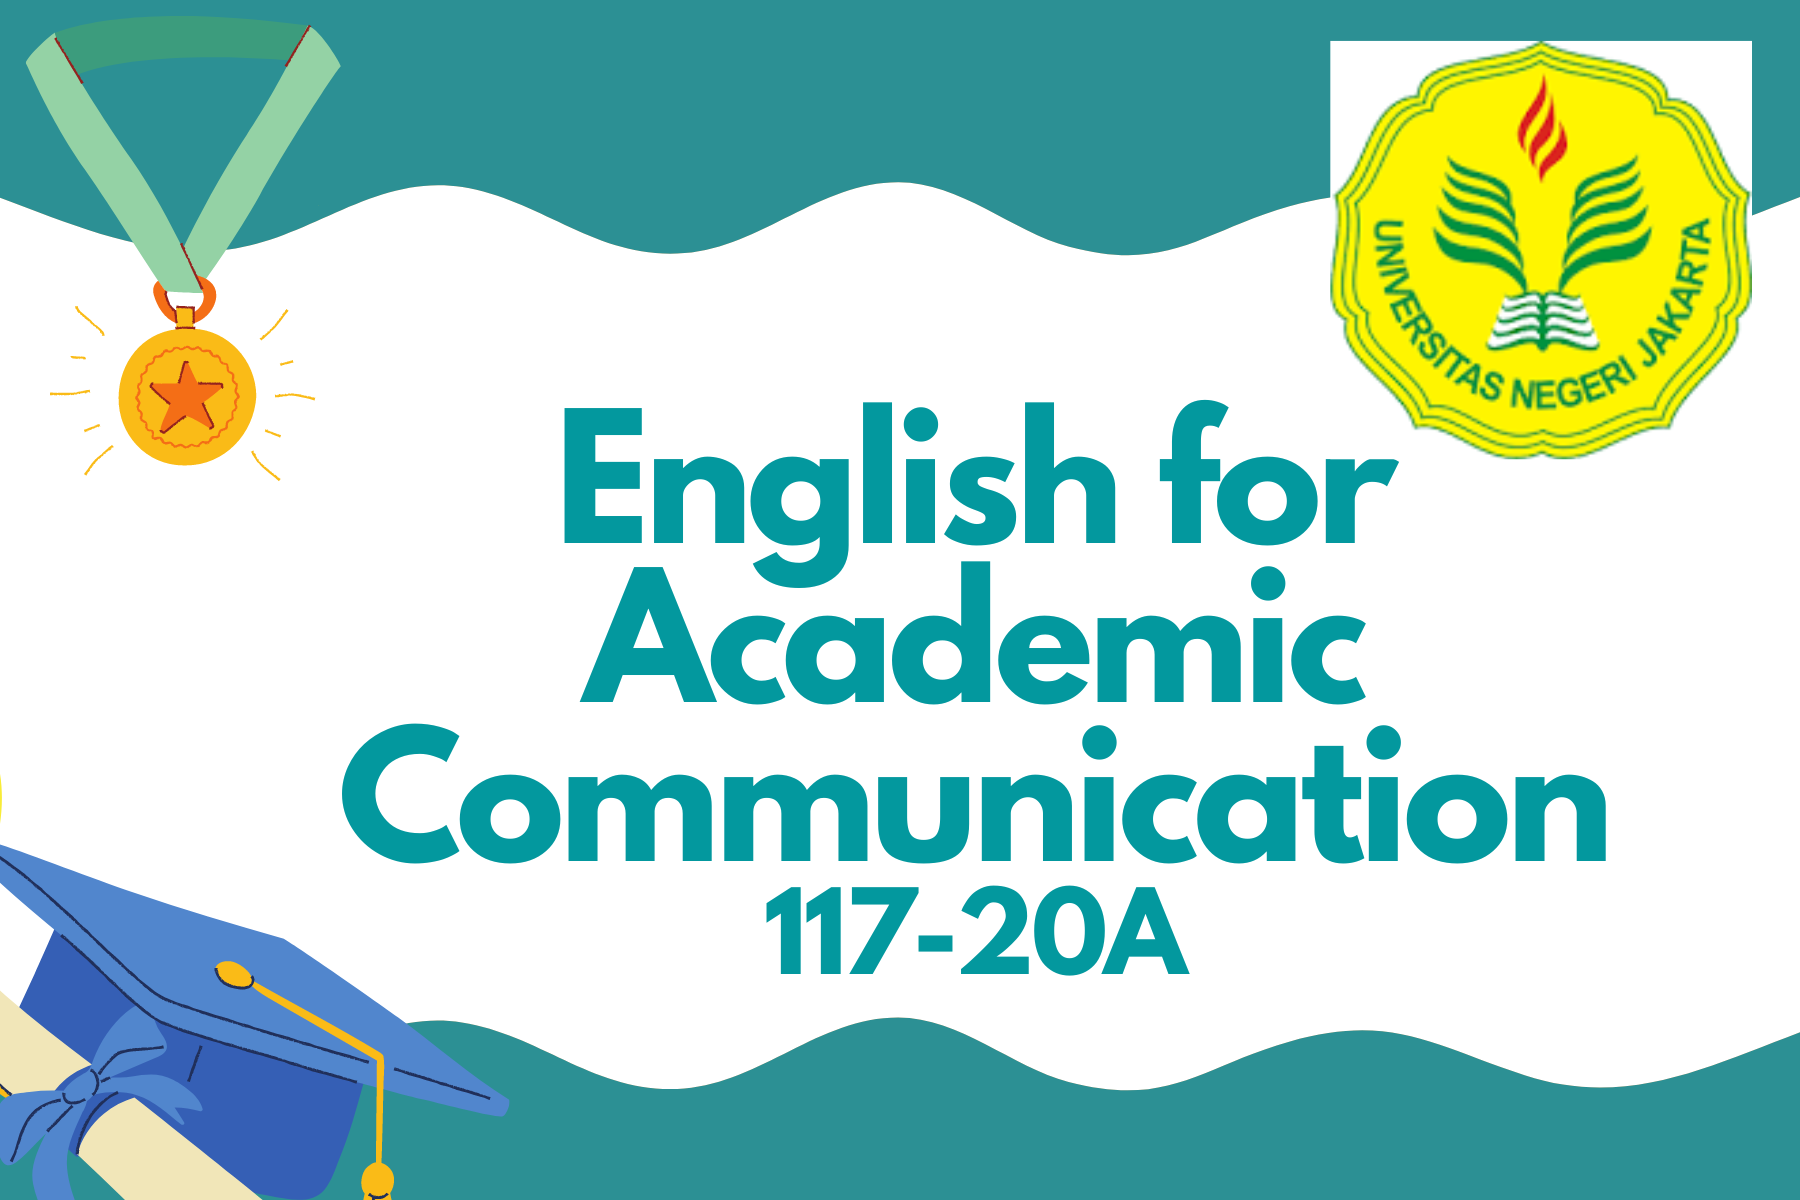 English for Academic Communication (117-20A)